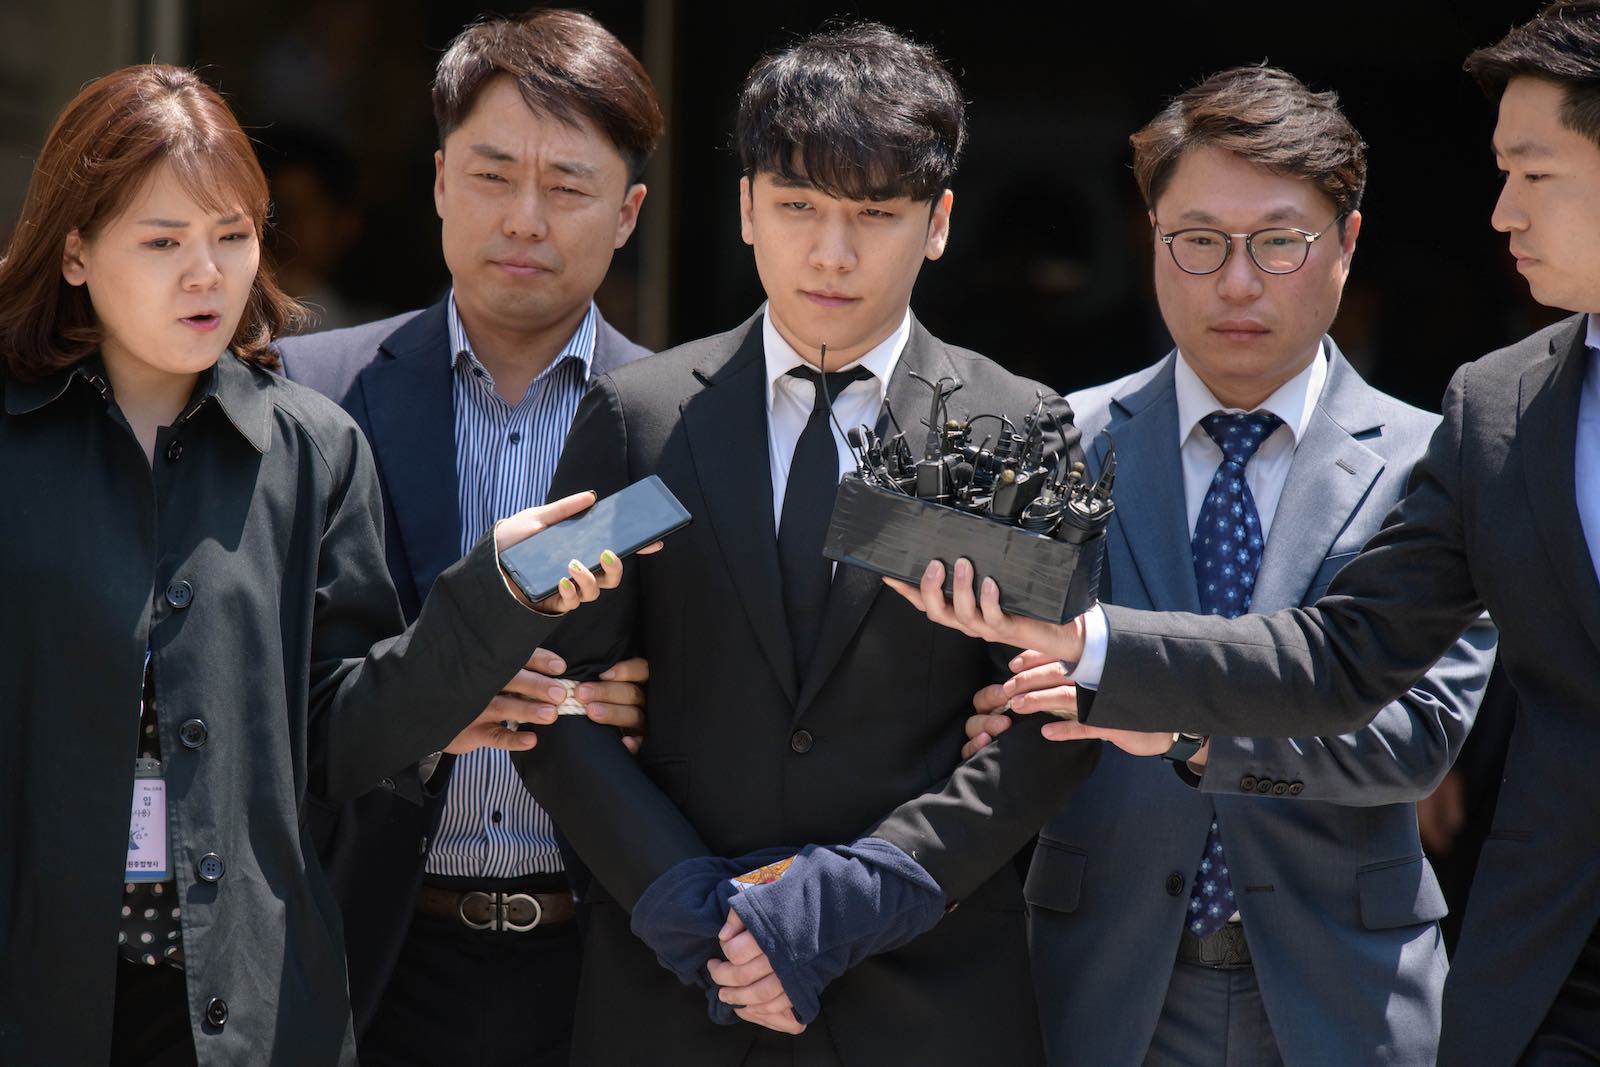 School Korean Force Sex - The Burning Sun scandal that torched South Korea's elites | Lowy Institute